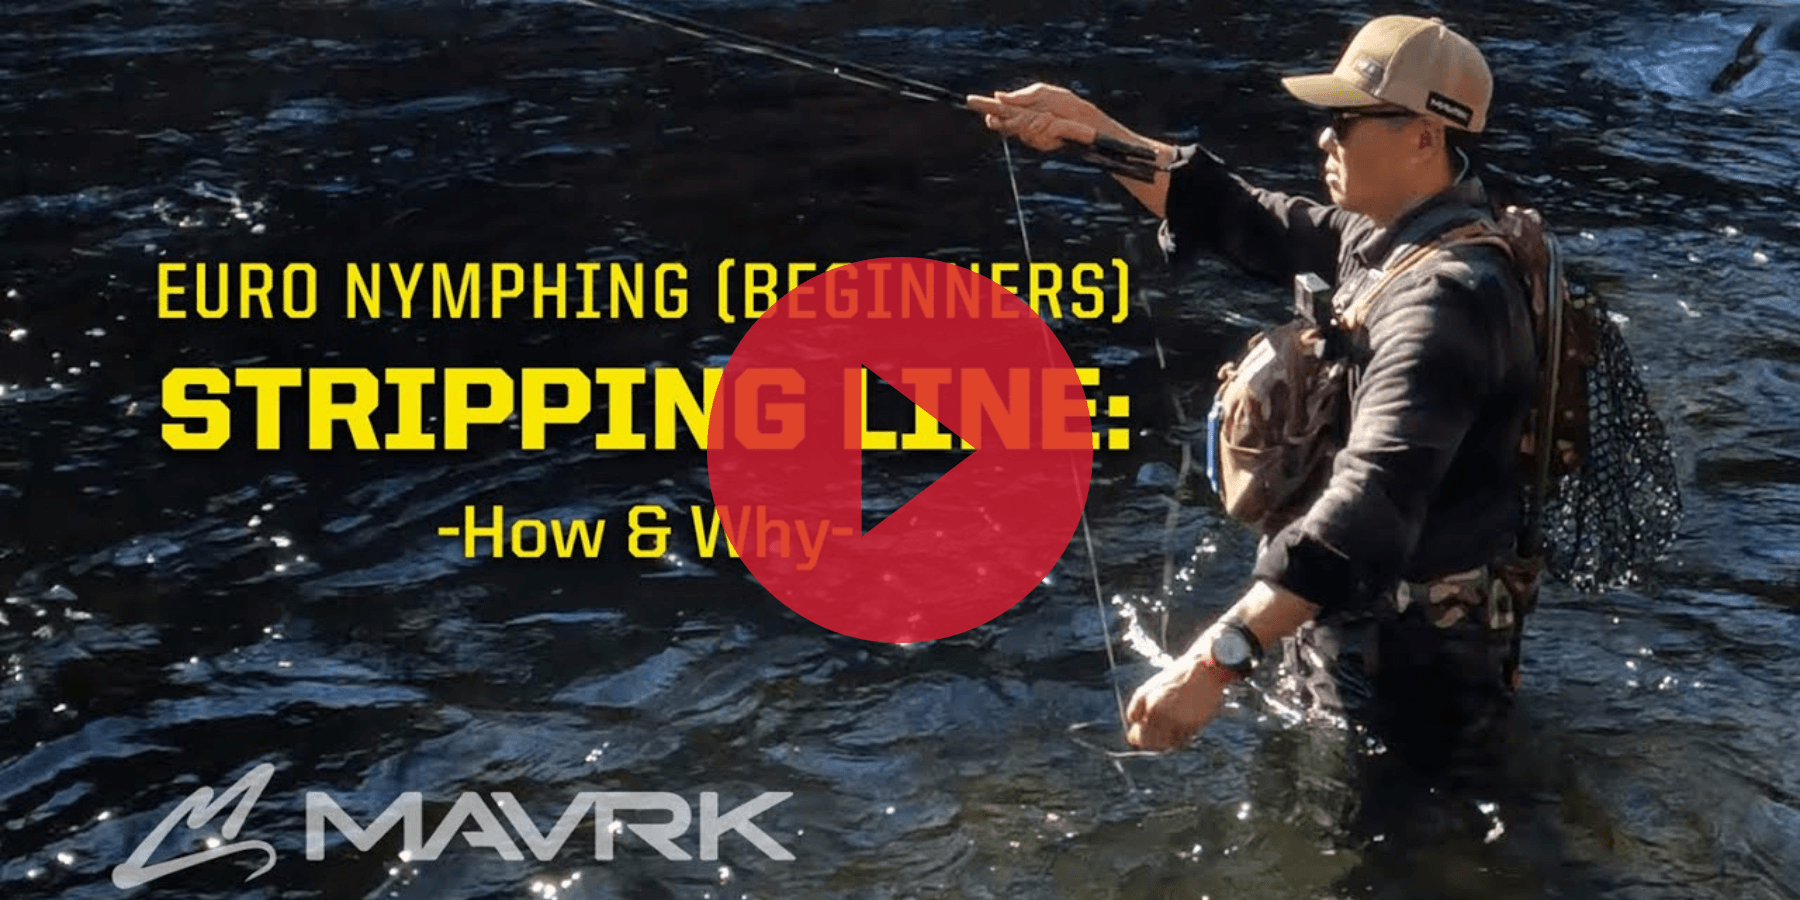 Euro nymphing tips on stripping line- how and why. One of the most important skills in fly fishing is stripping line